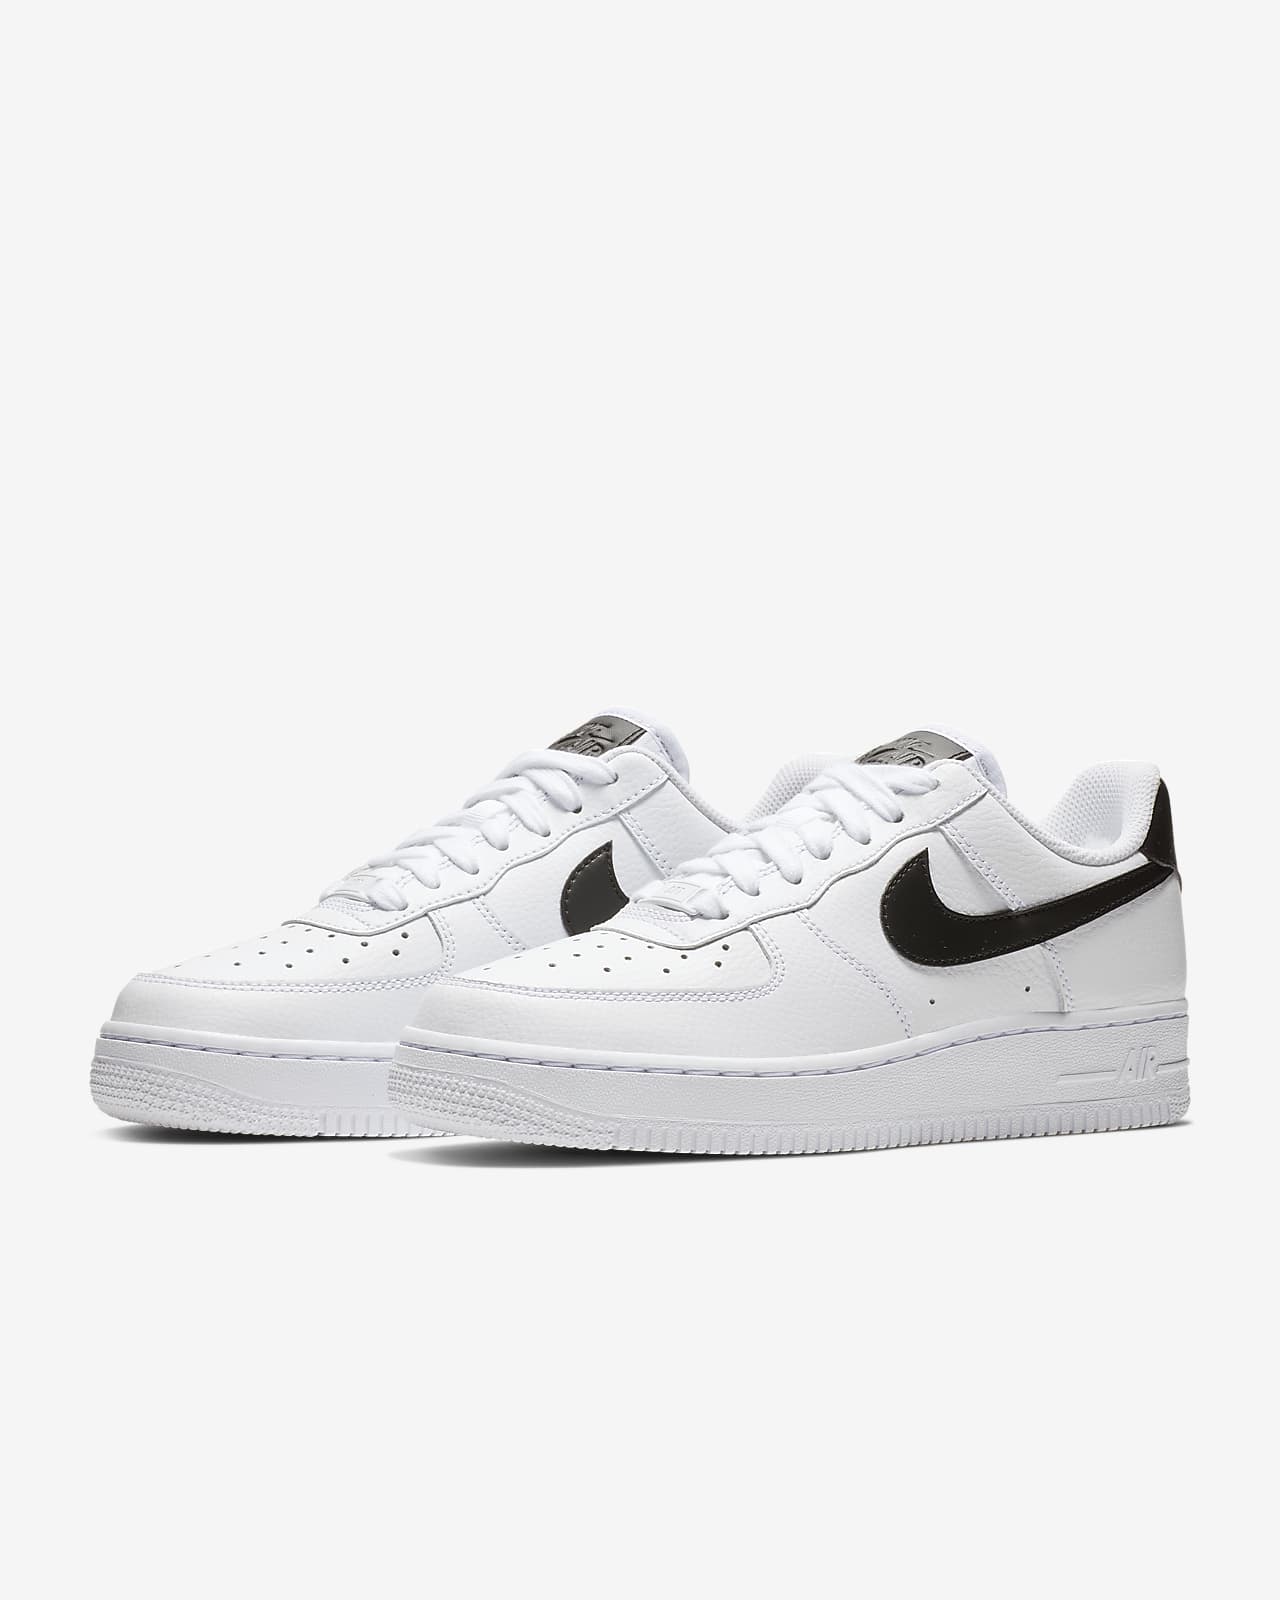 all white air force ones on sale